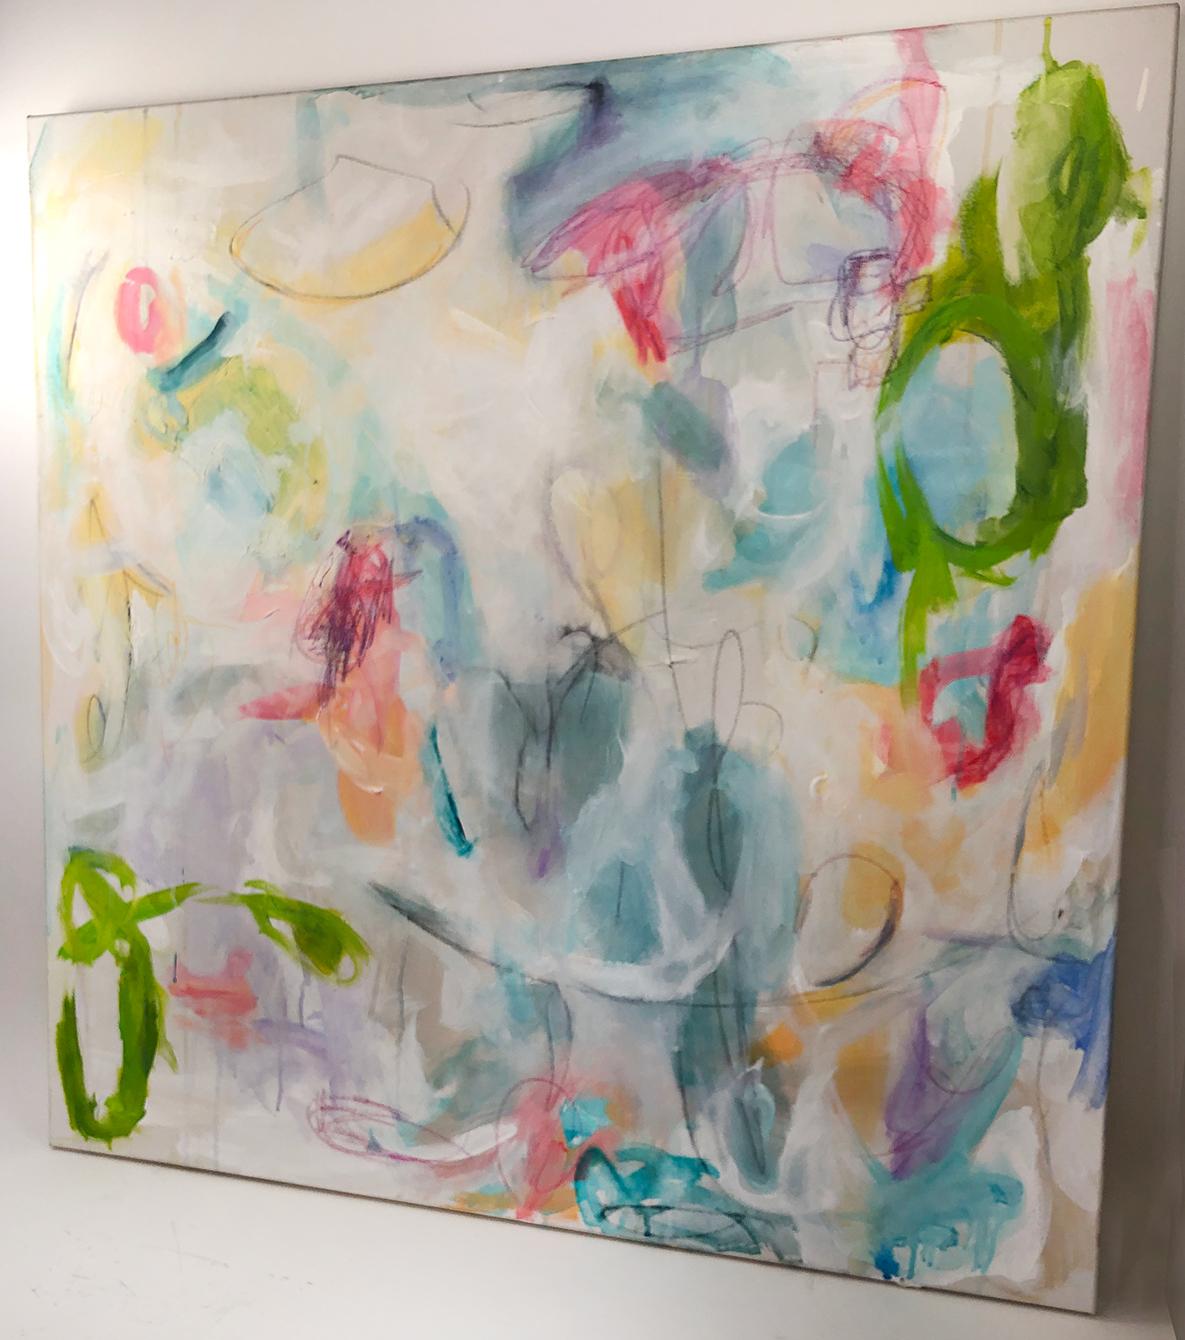 An elegantly subtle abstract expressionist acrylic painting by Mary Peyton Barklay titled “2000’s” from 2017. Hand painted with white and light pastel colors, including blues, greens, reds, yellows, and oranges. This painting was purchased at a